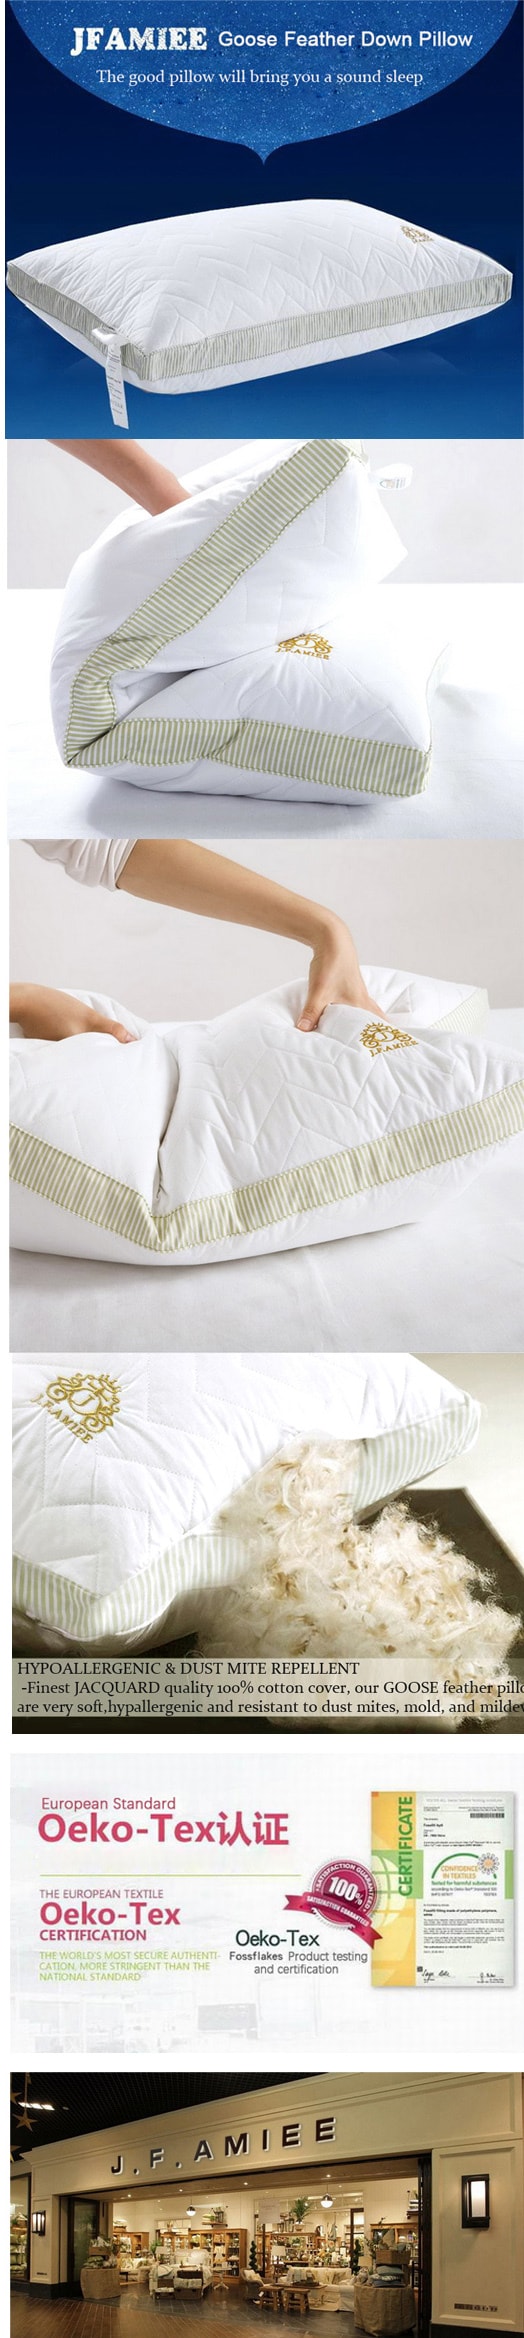 J.F.AMIEE Goose Feather Down Pillow 100% Cotton Bed Pillow White Set of 2  Standard